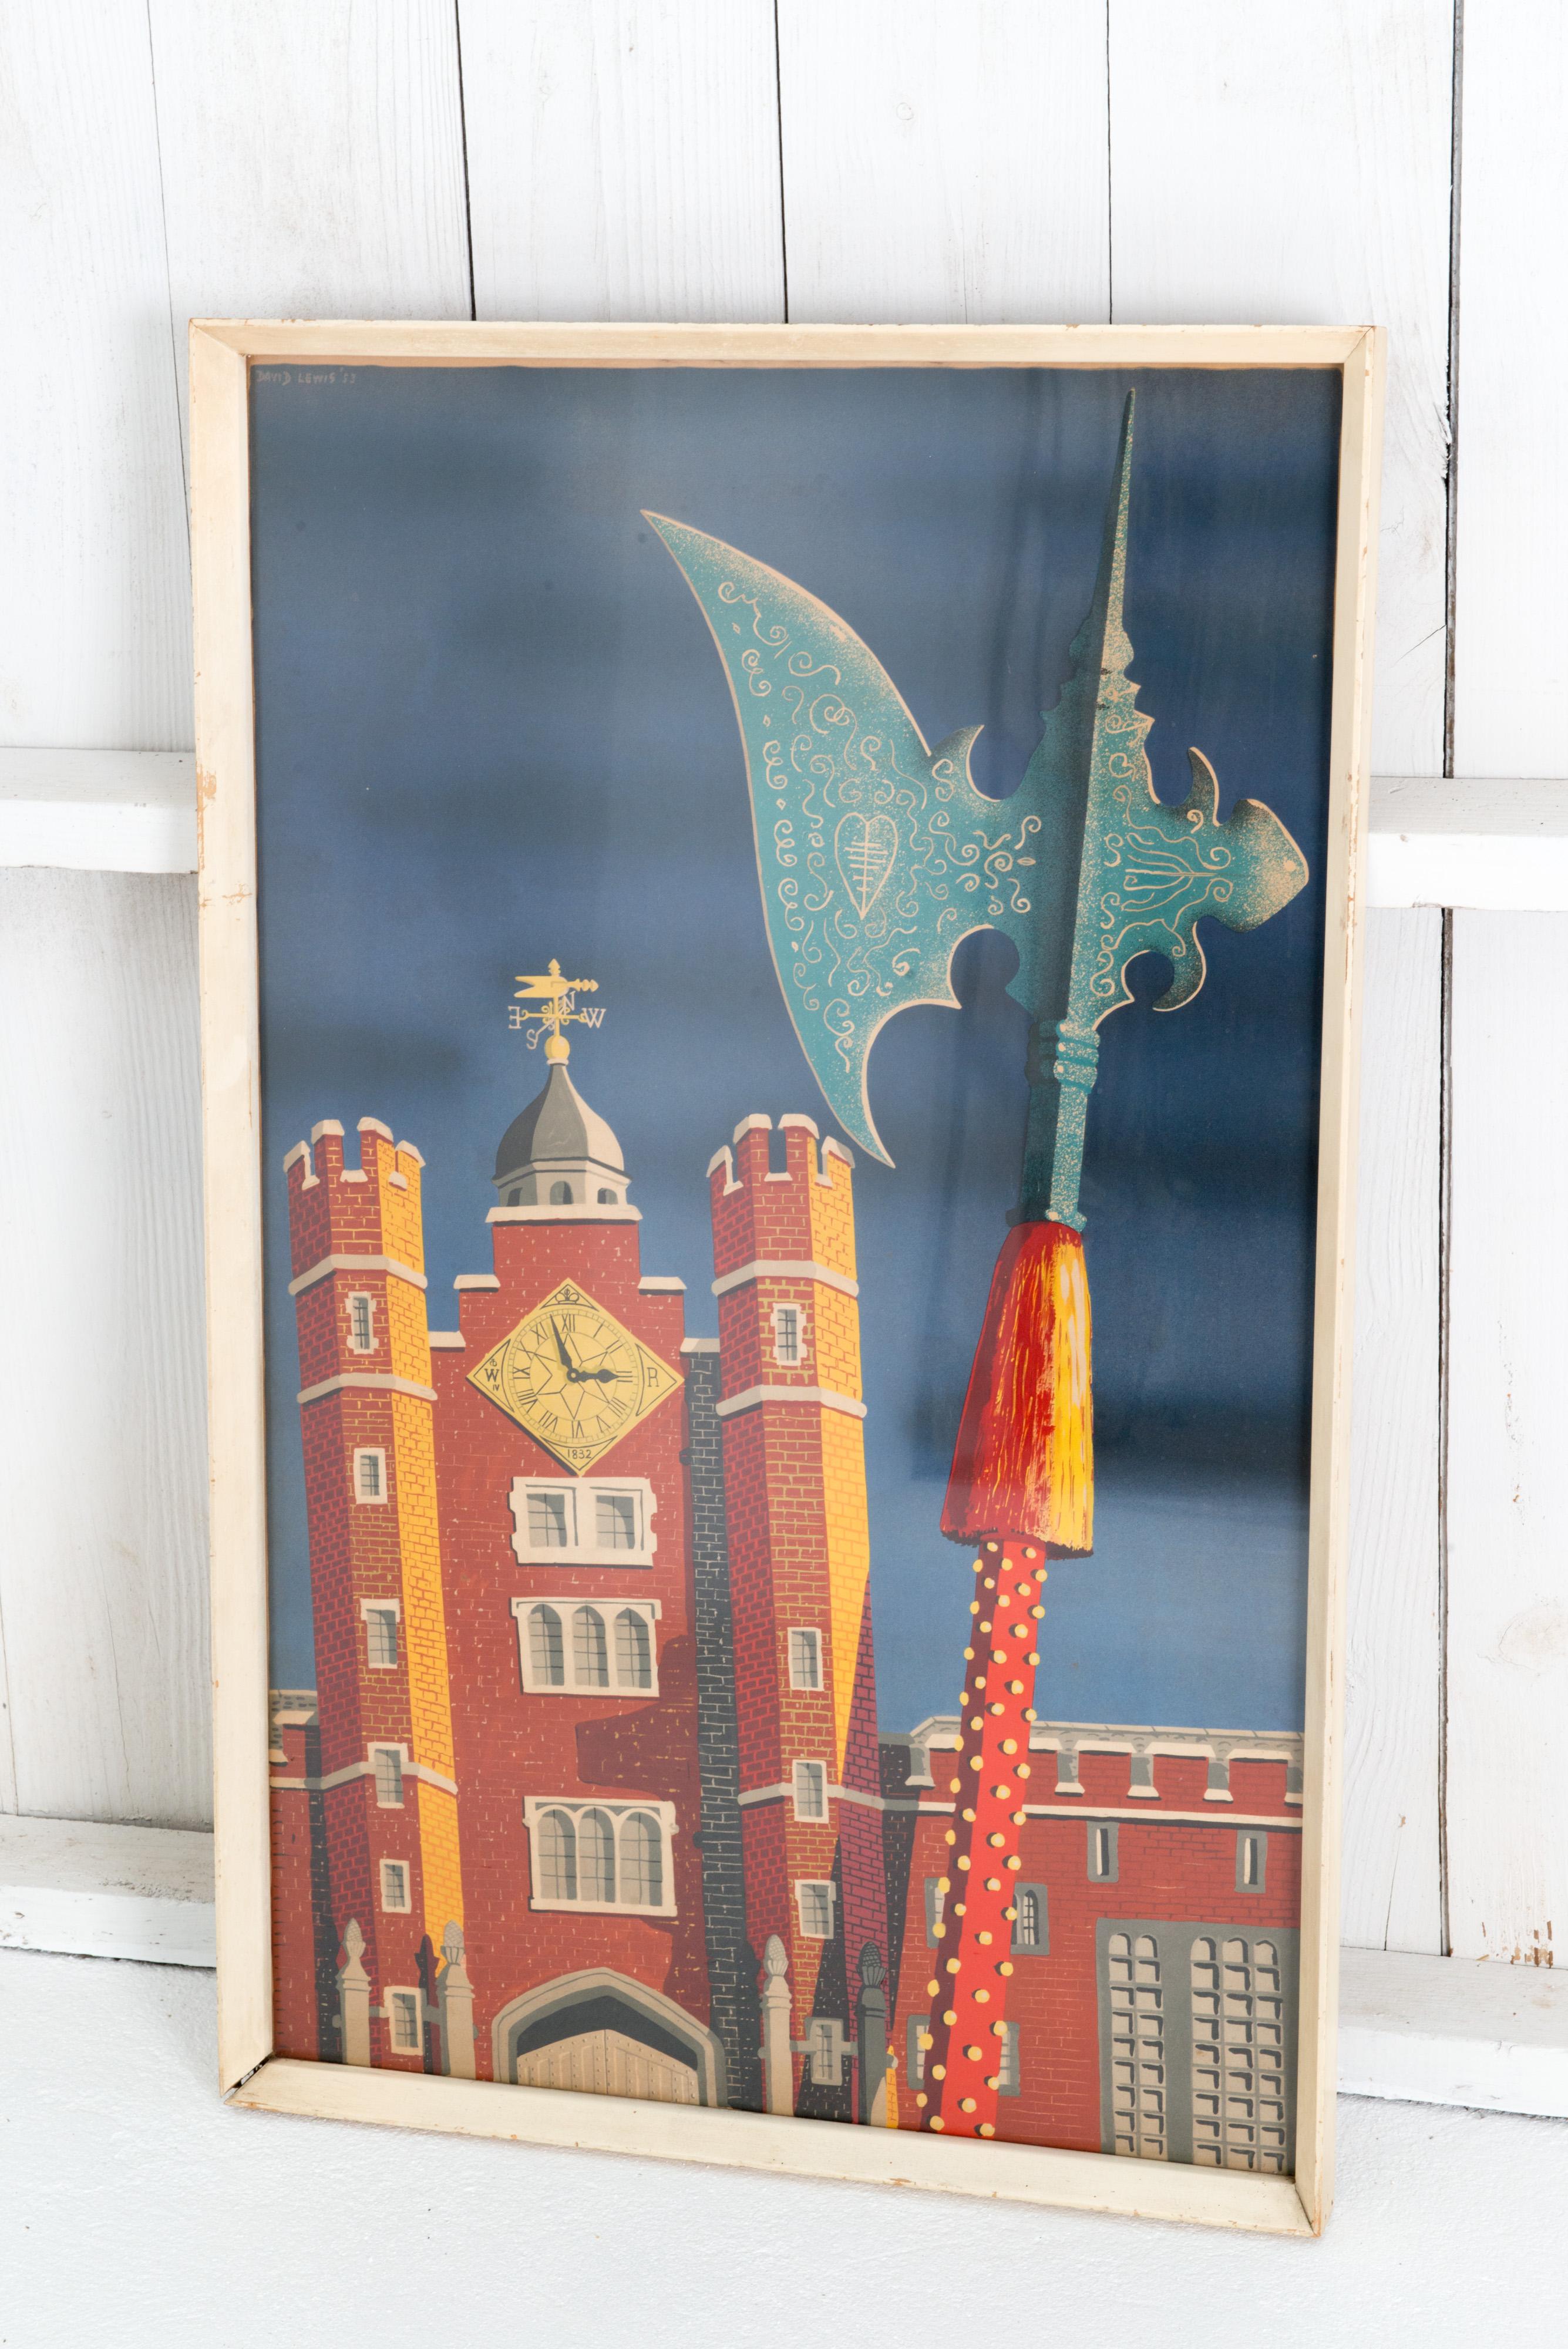 A signed lithograph travel poster for Royal London St. James Palace designed by illustrator David Lewis. The poster depicts the red brick clock tower of St James Palace and an elaborate Medieval battle axe against a rich blue background. It is